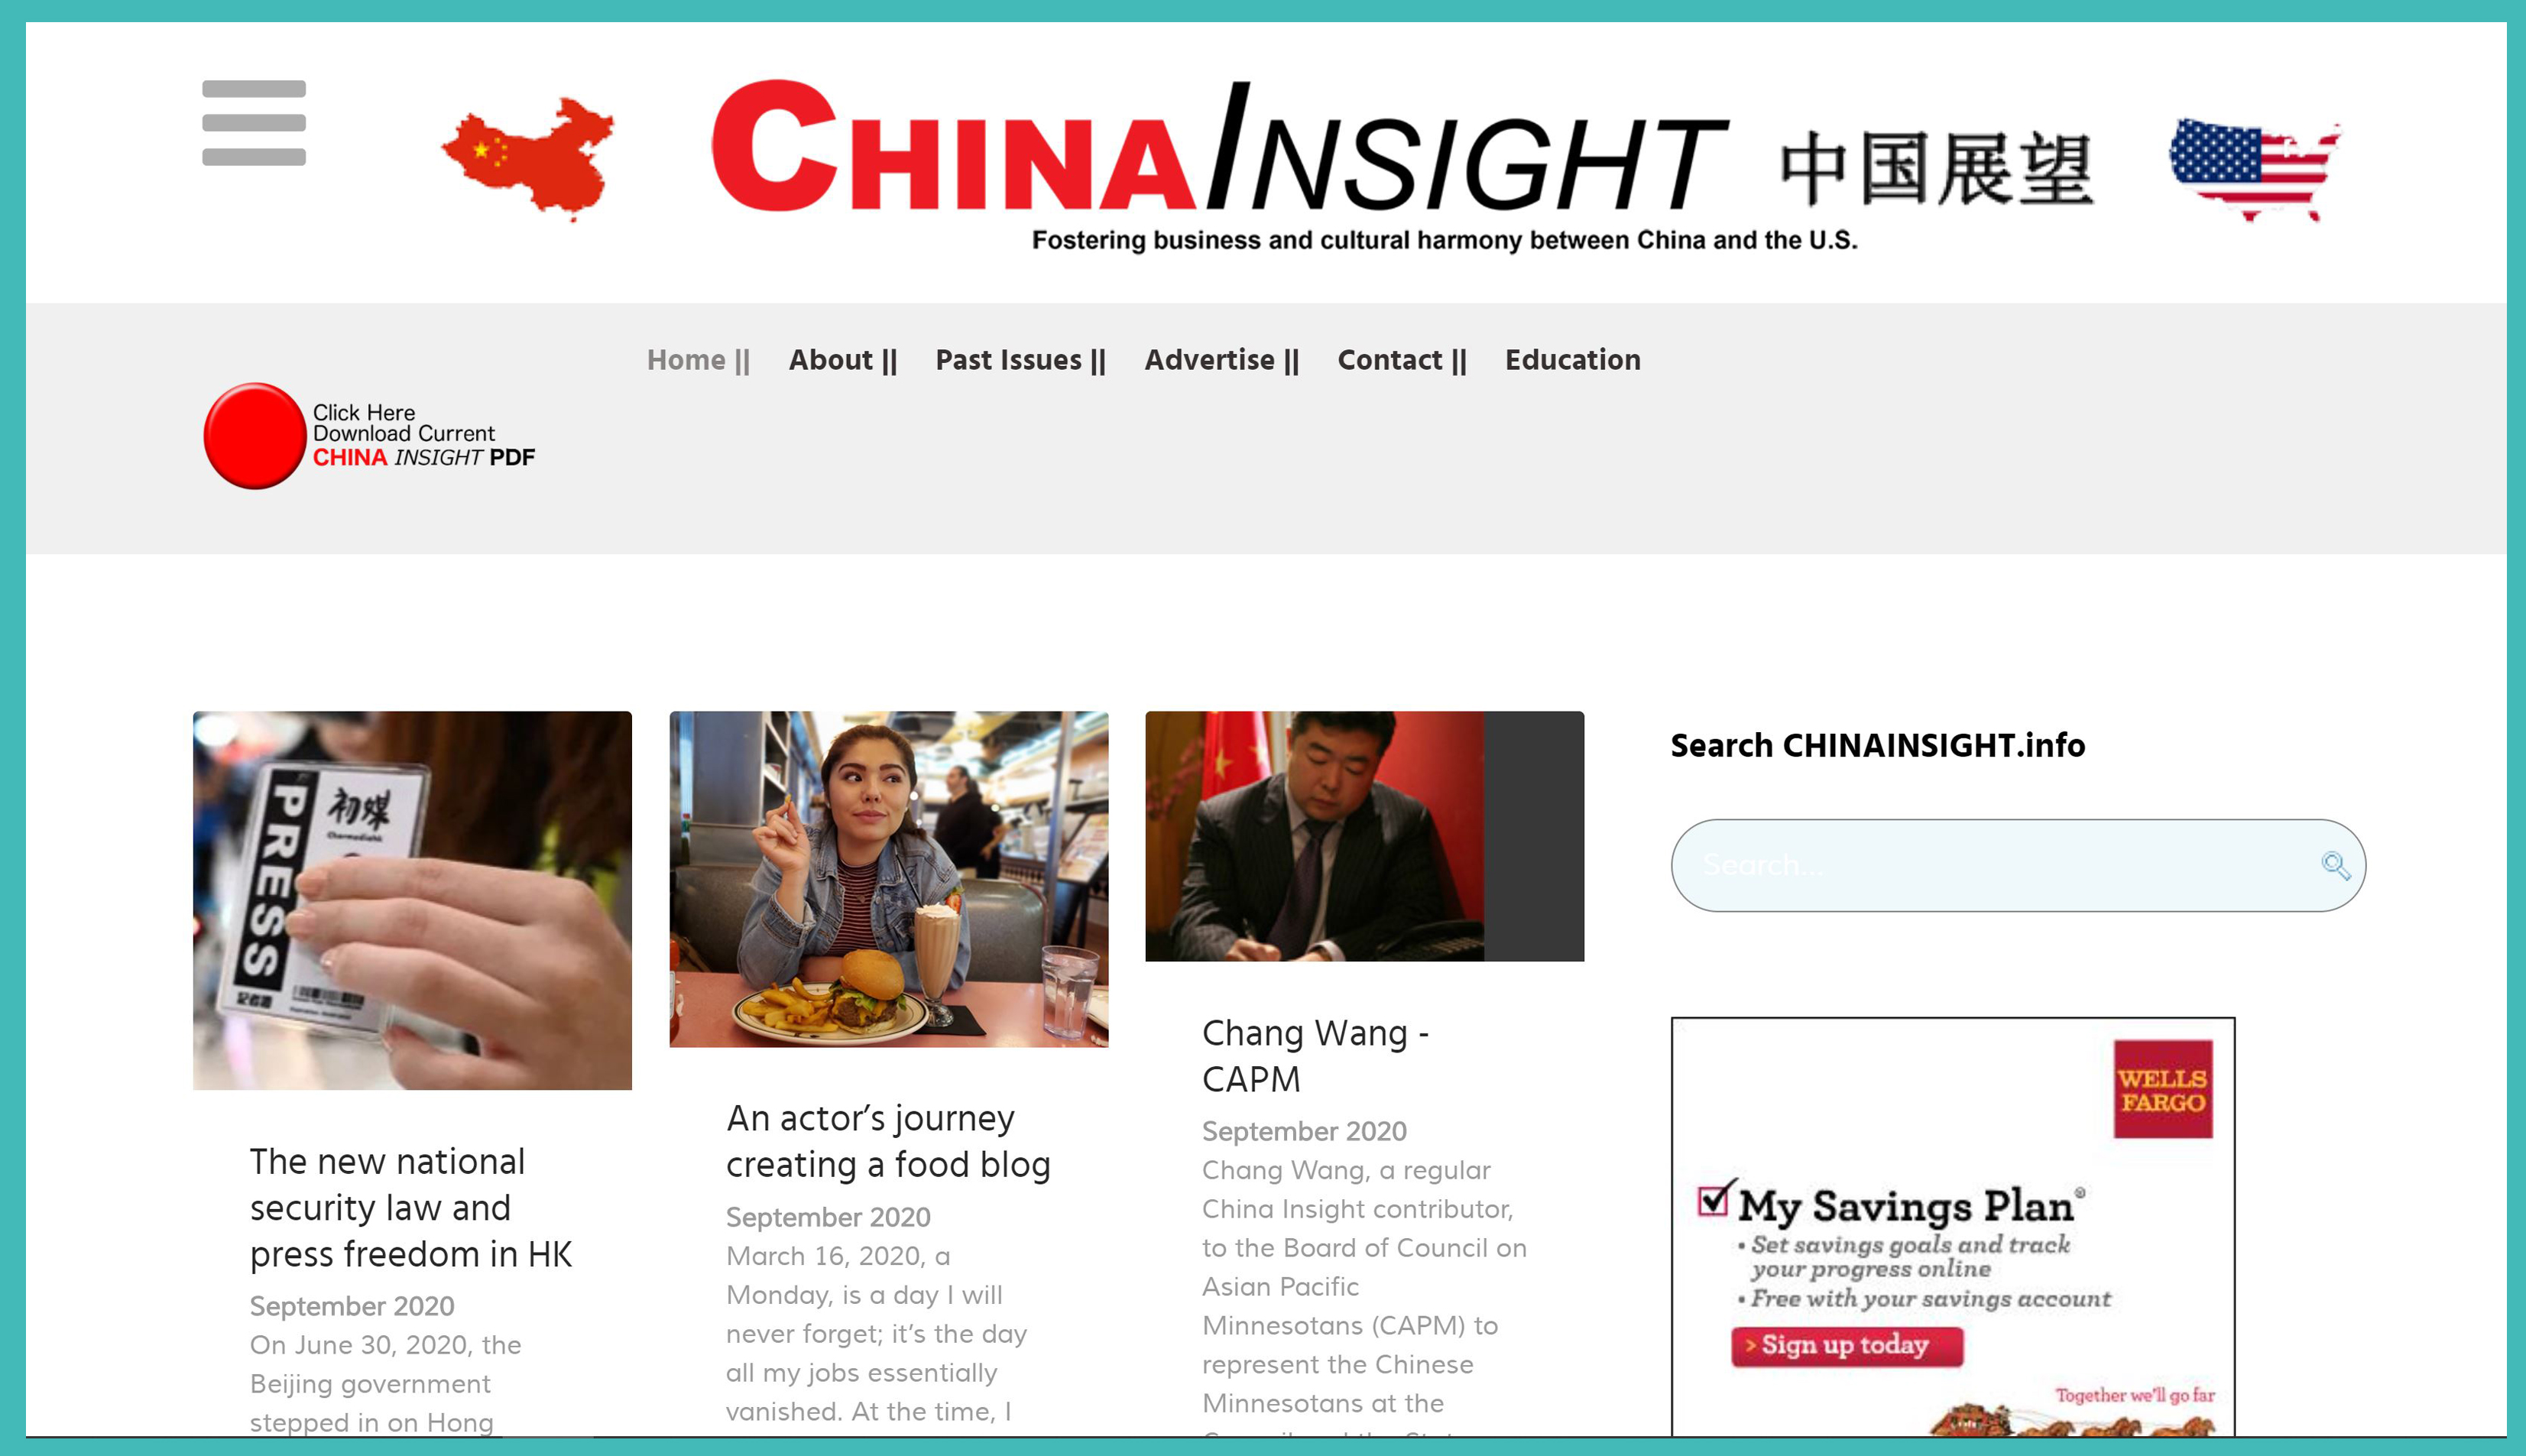 The Webpage of the China Insight Newspaper, photo of me eating fries in a diner with several articles listed below